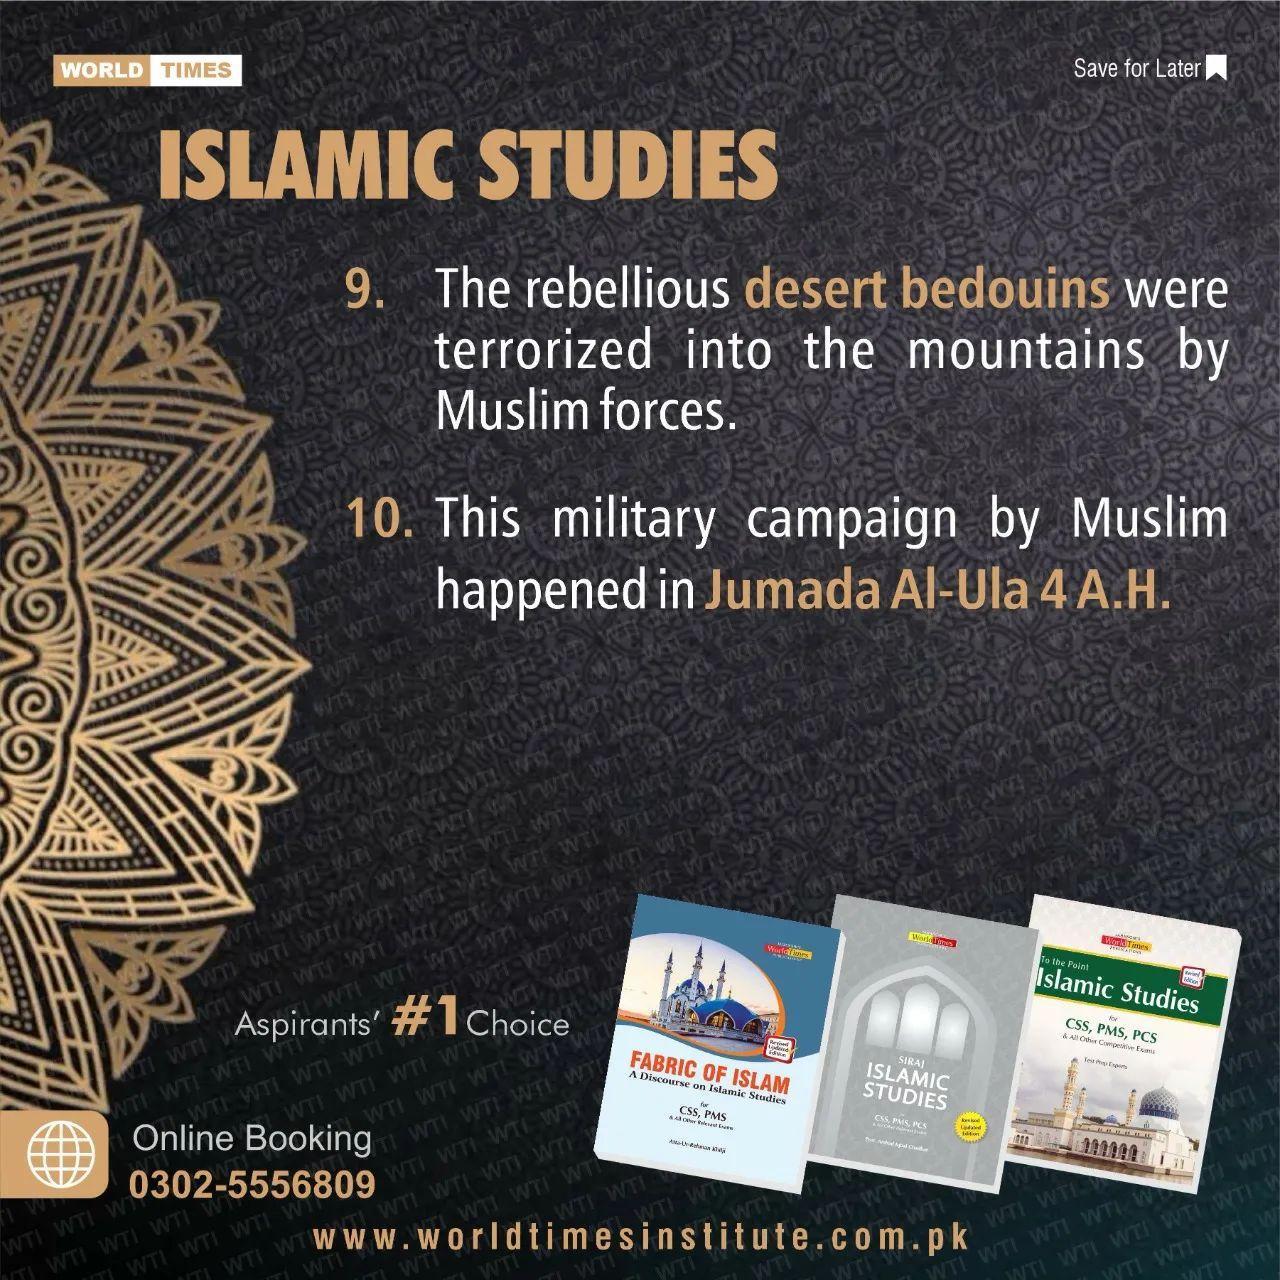 You are currently viewing Islamic Studies 23-11-2022